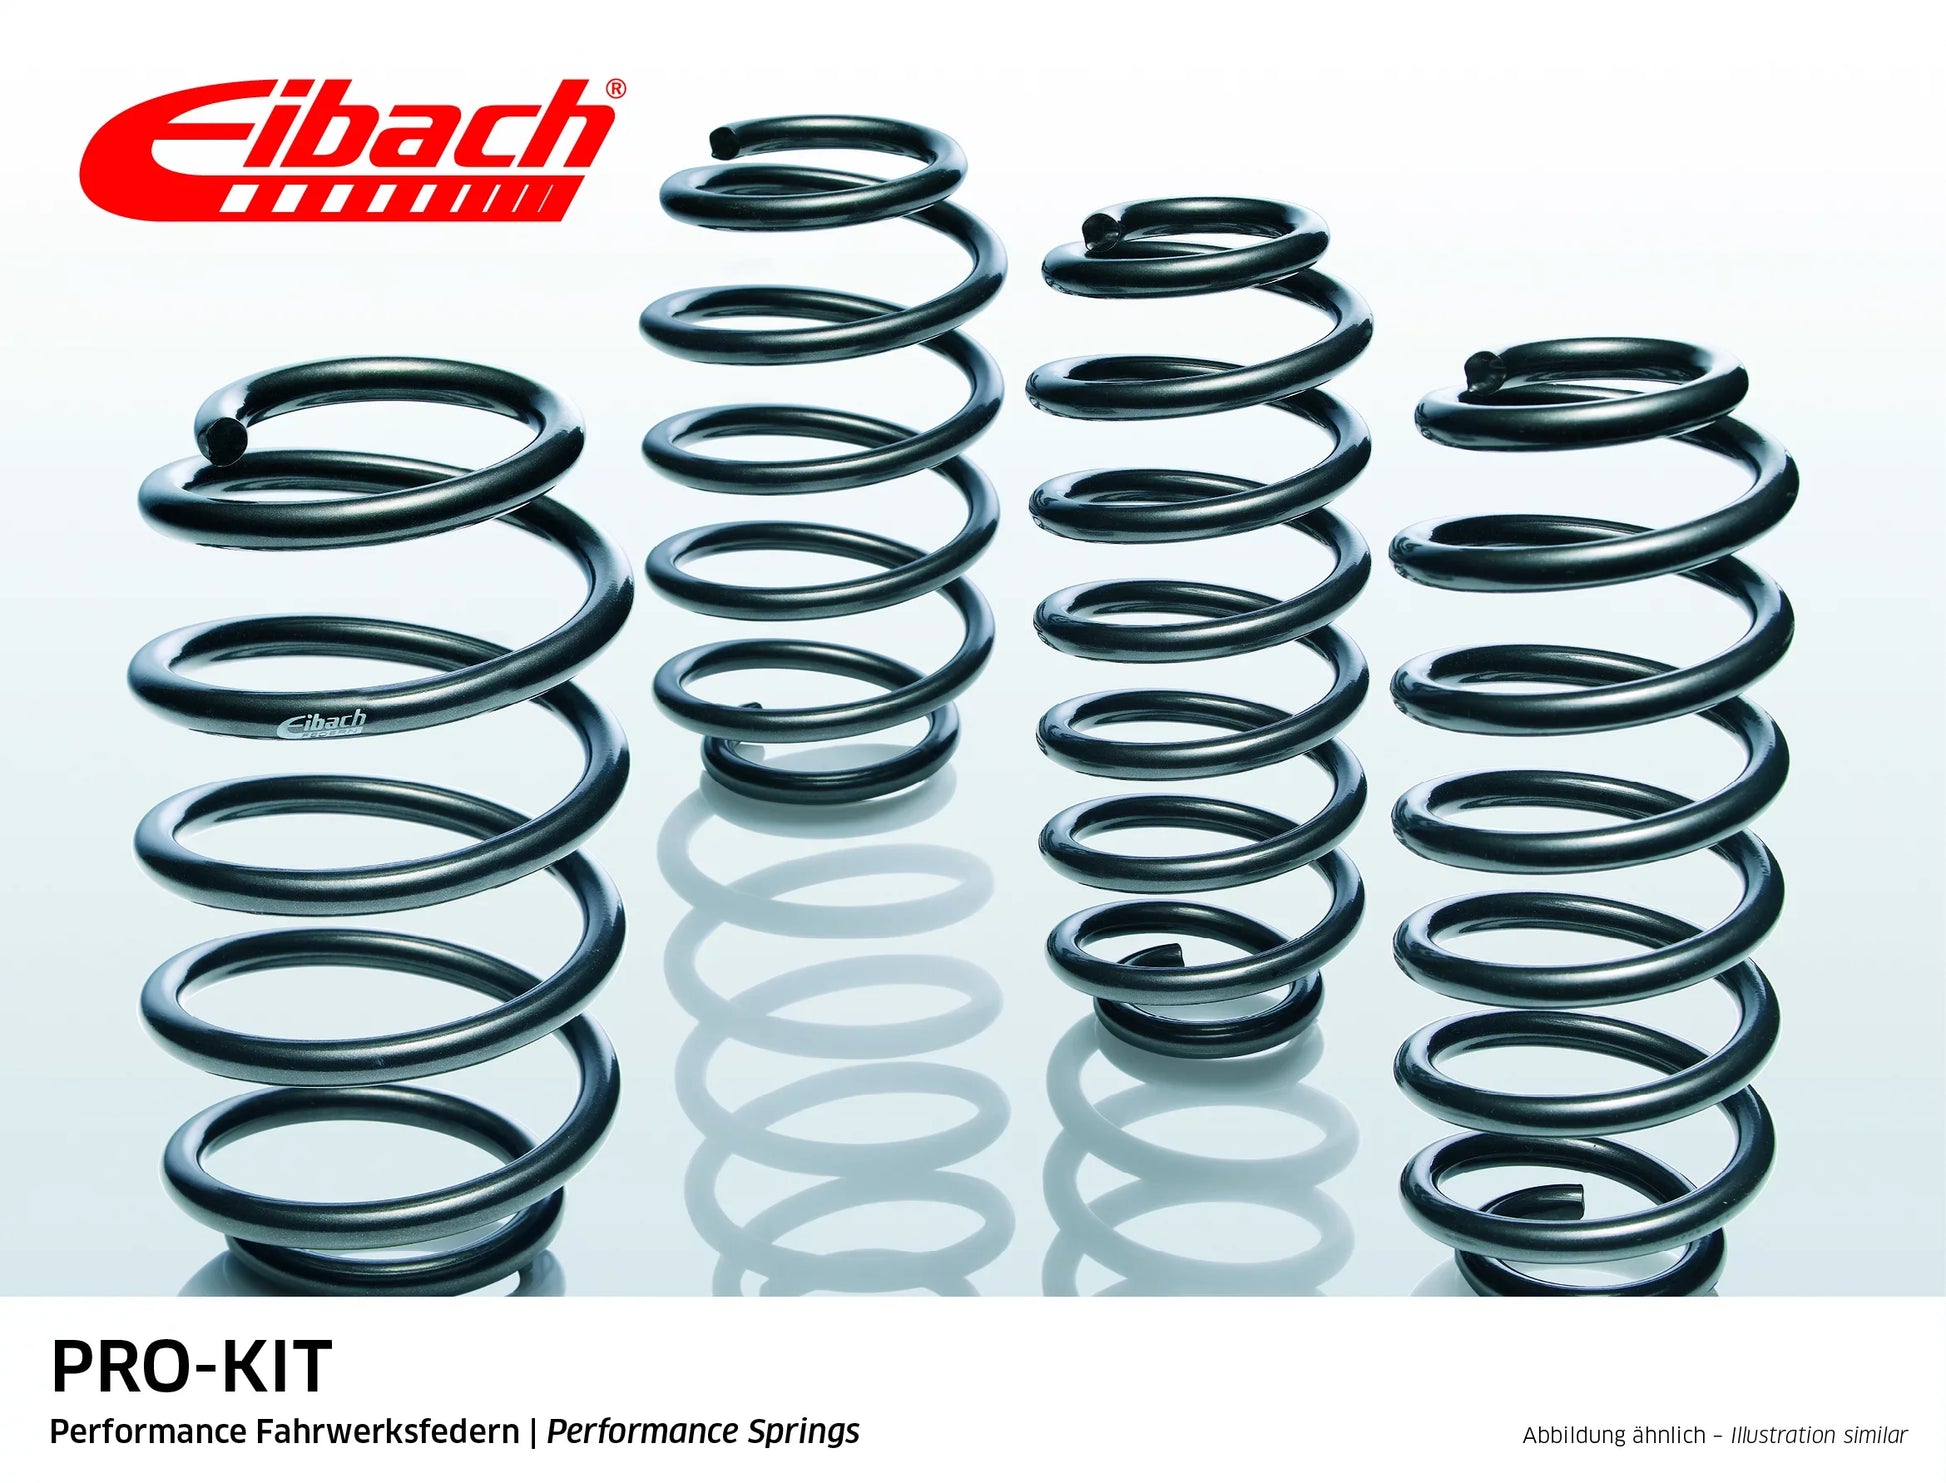 Eibach Pro-Kit Lowering Springs (E10-15-001-01-22) at £283.87